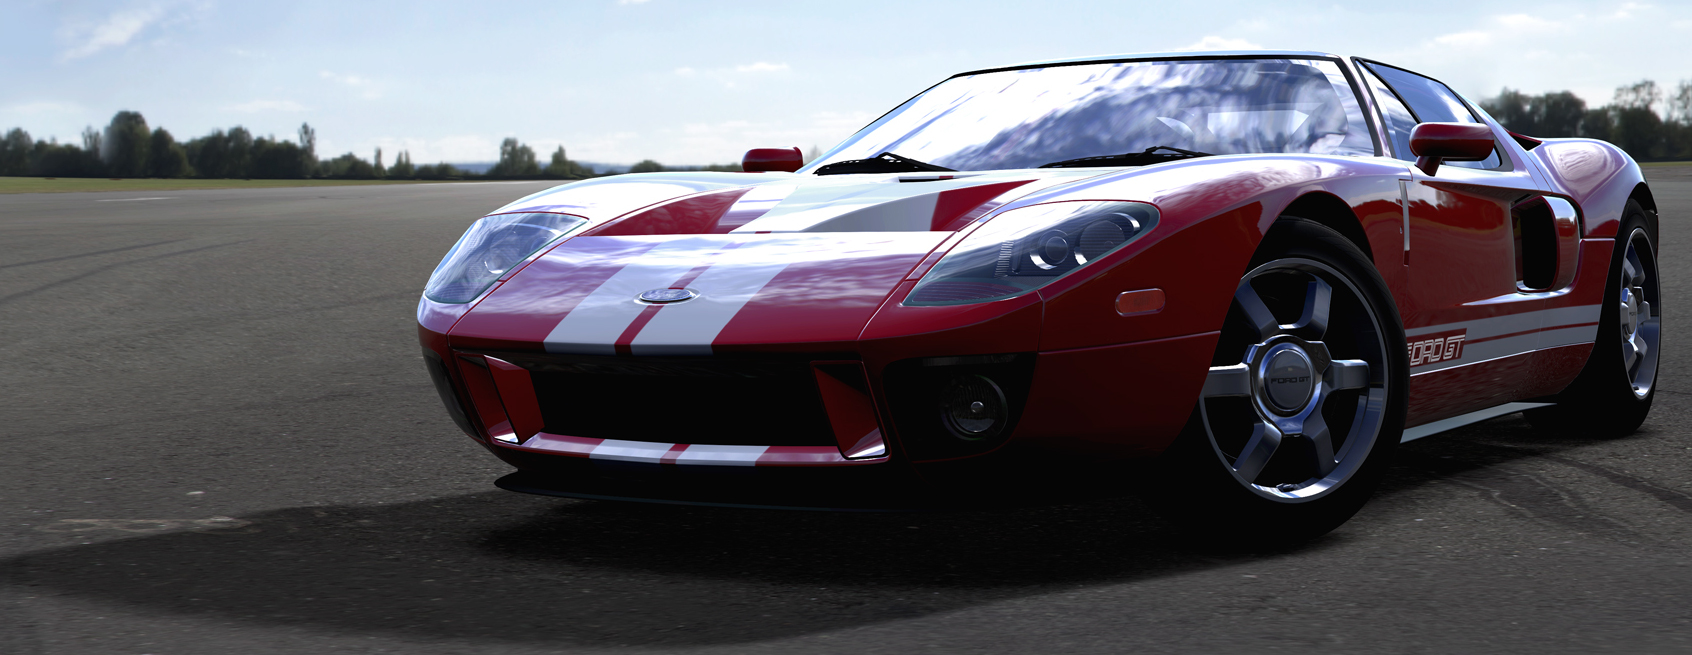 Forza 4 ford gt 40 achievement #7